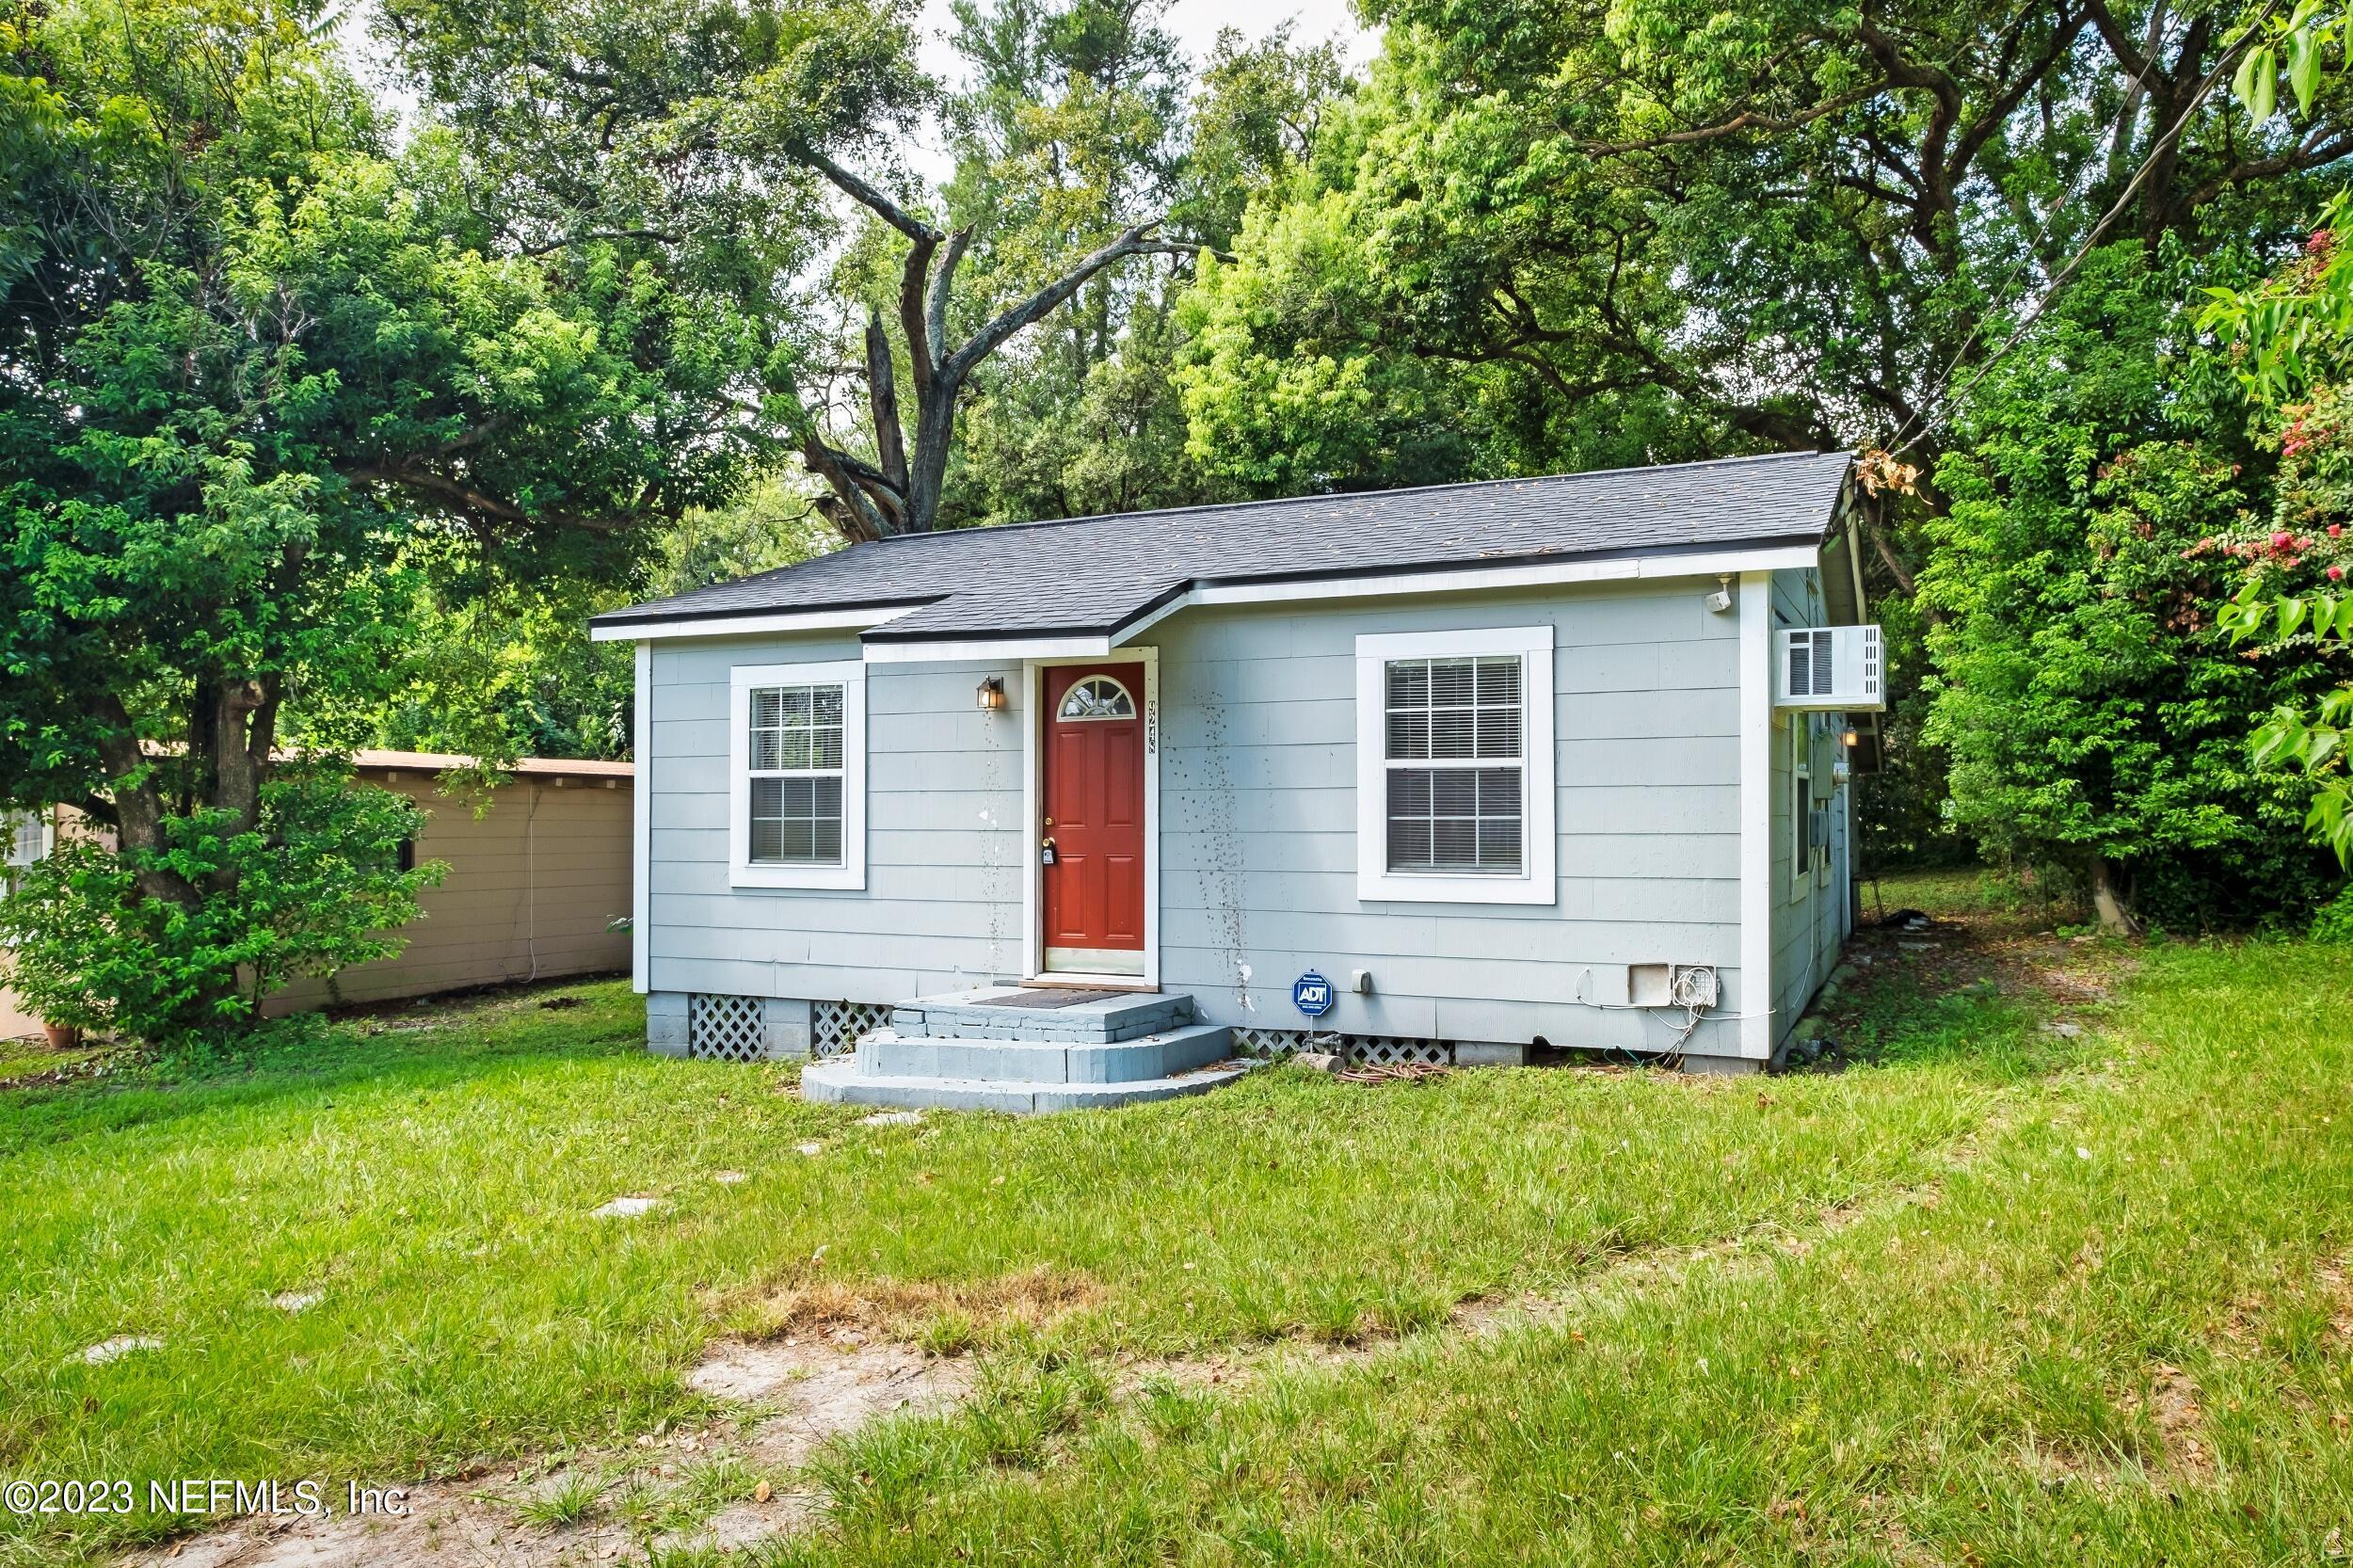 Jacksonville, FL home for sale located at 9248 9th Avenue, Jacksonville, FL 32208